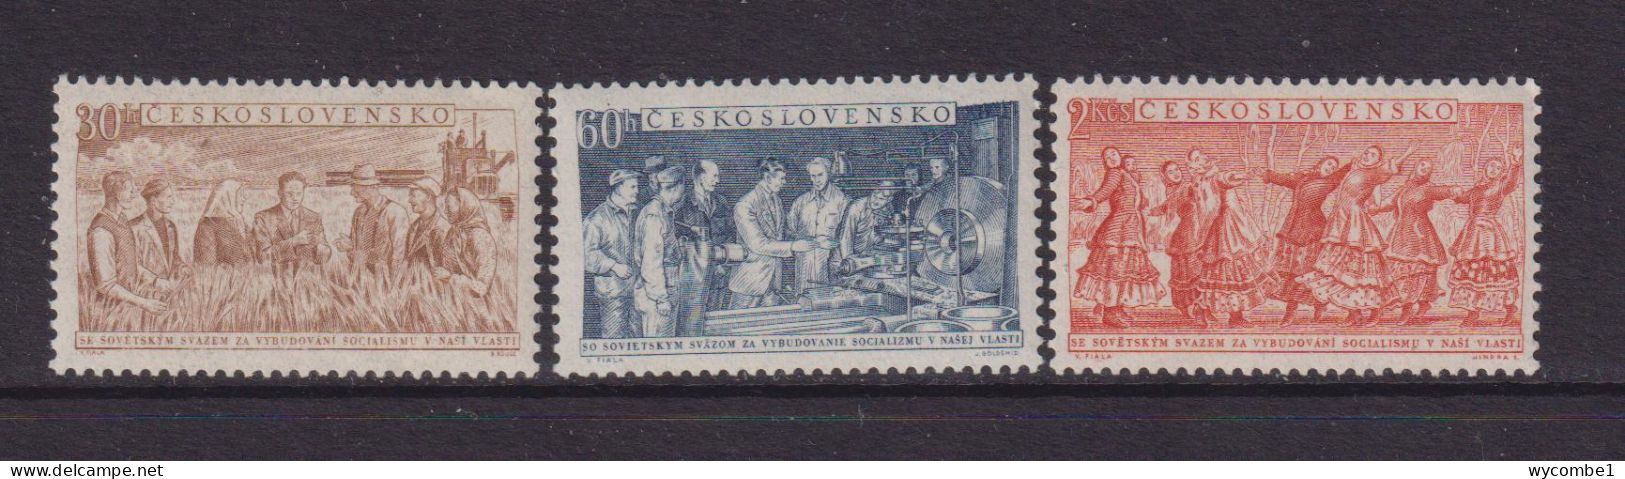 CZECHOSLOVAKIA  - 1954  Russian Friendship  Set  Never Hinged Mint - Unused Stamps